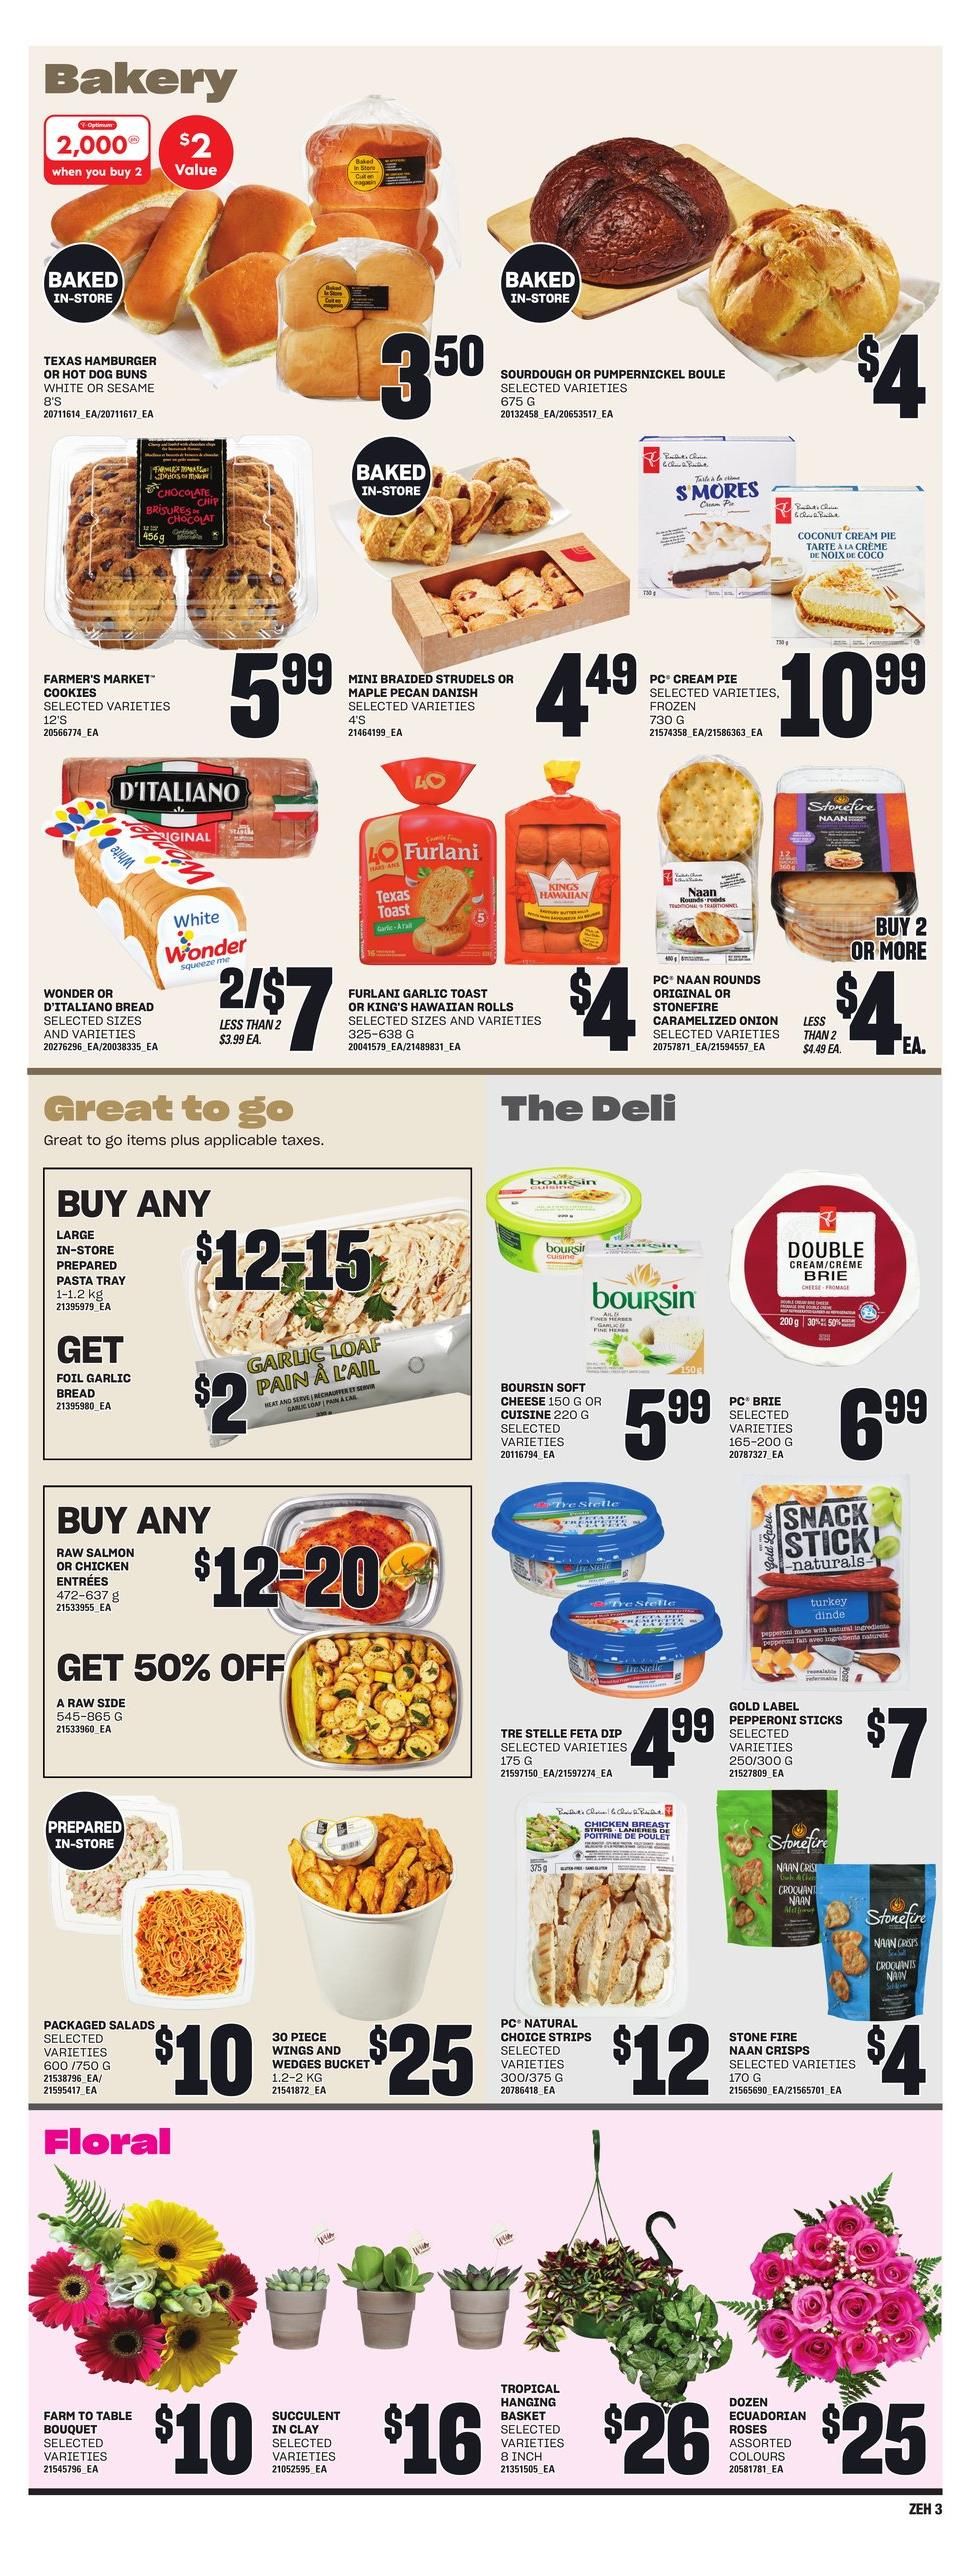 Zehrs - Weekly Flyer Specials - Page 5